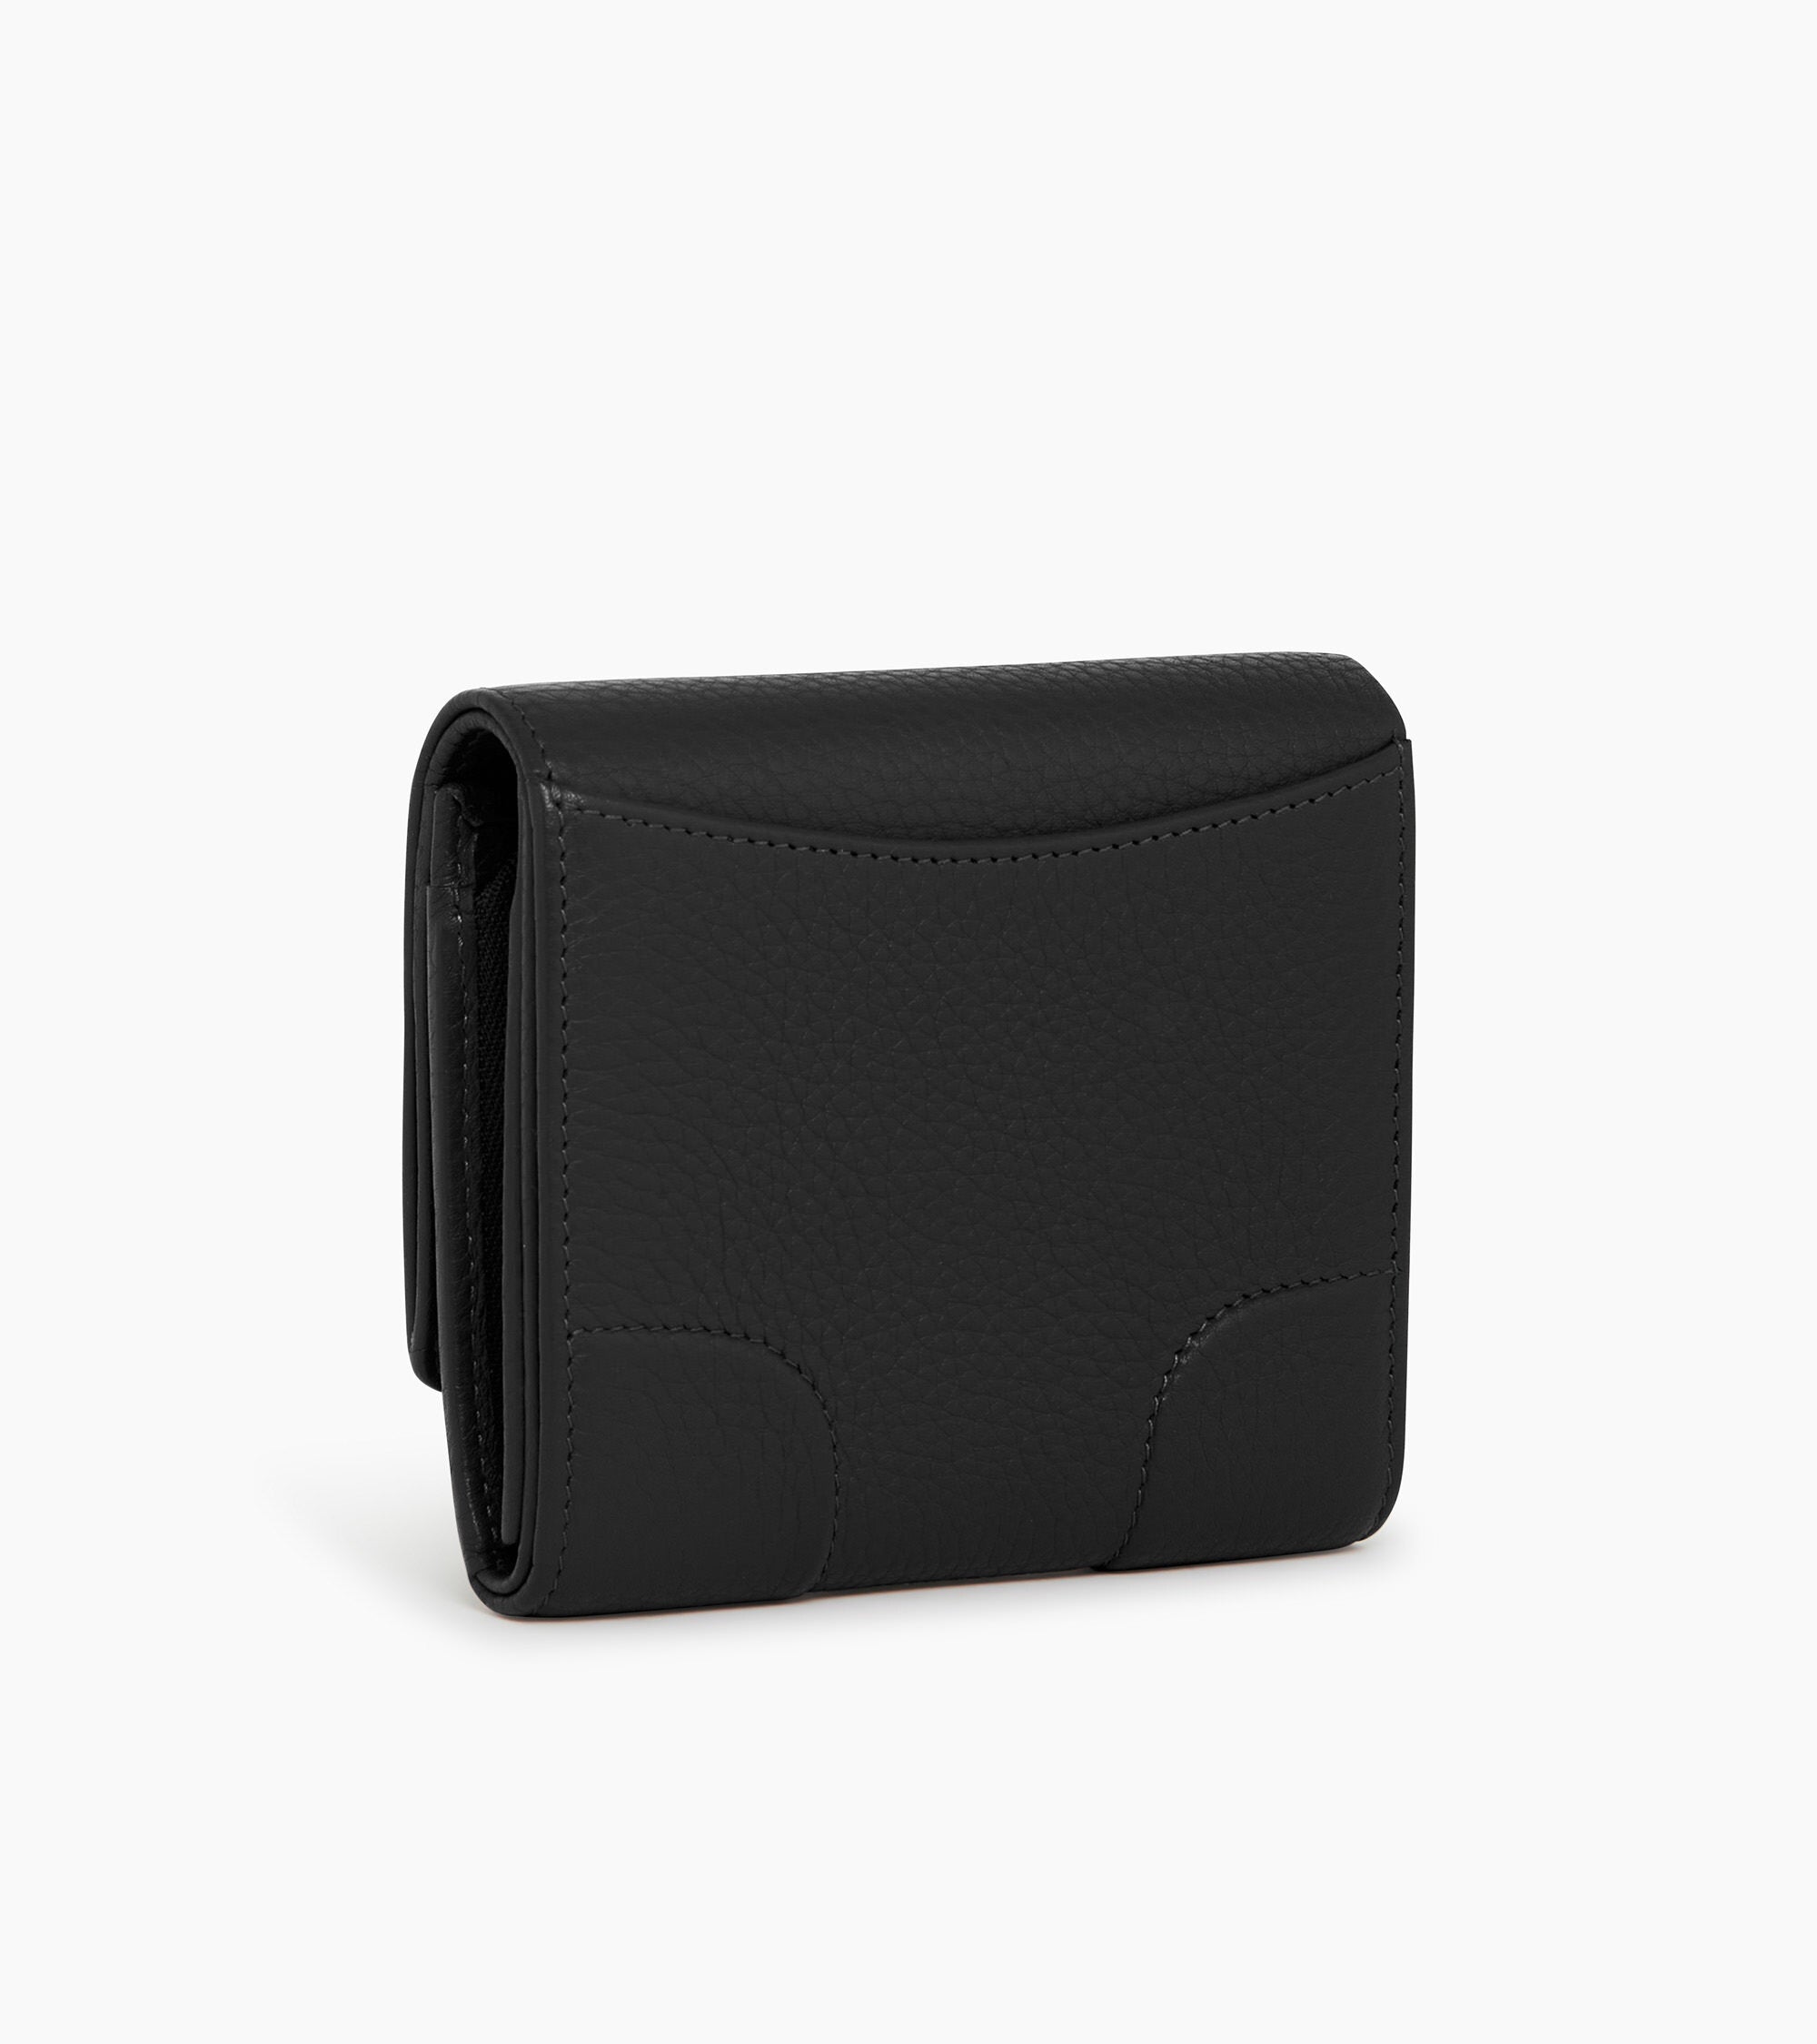 Romy small, zipped wallet in pebbled leather